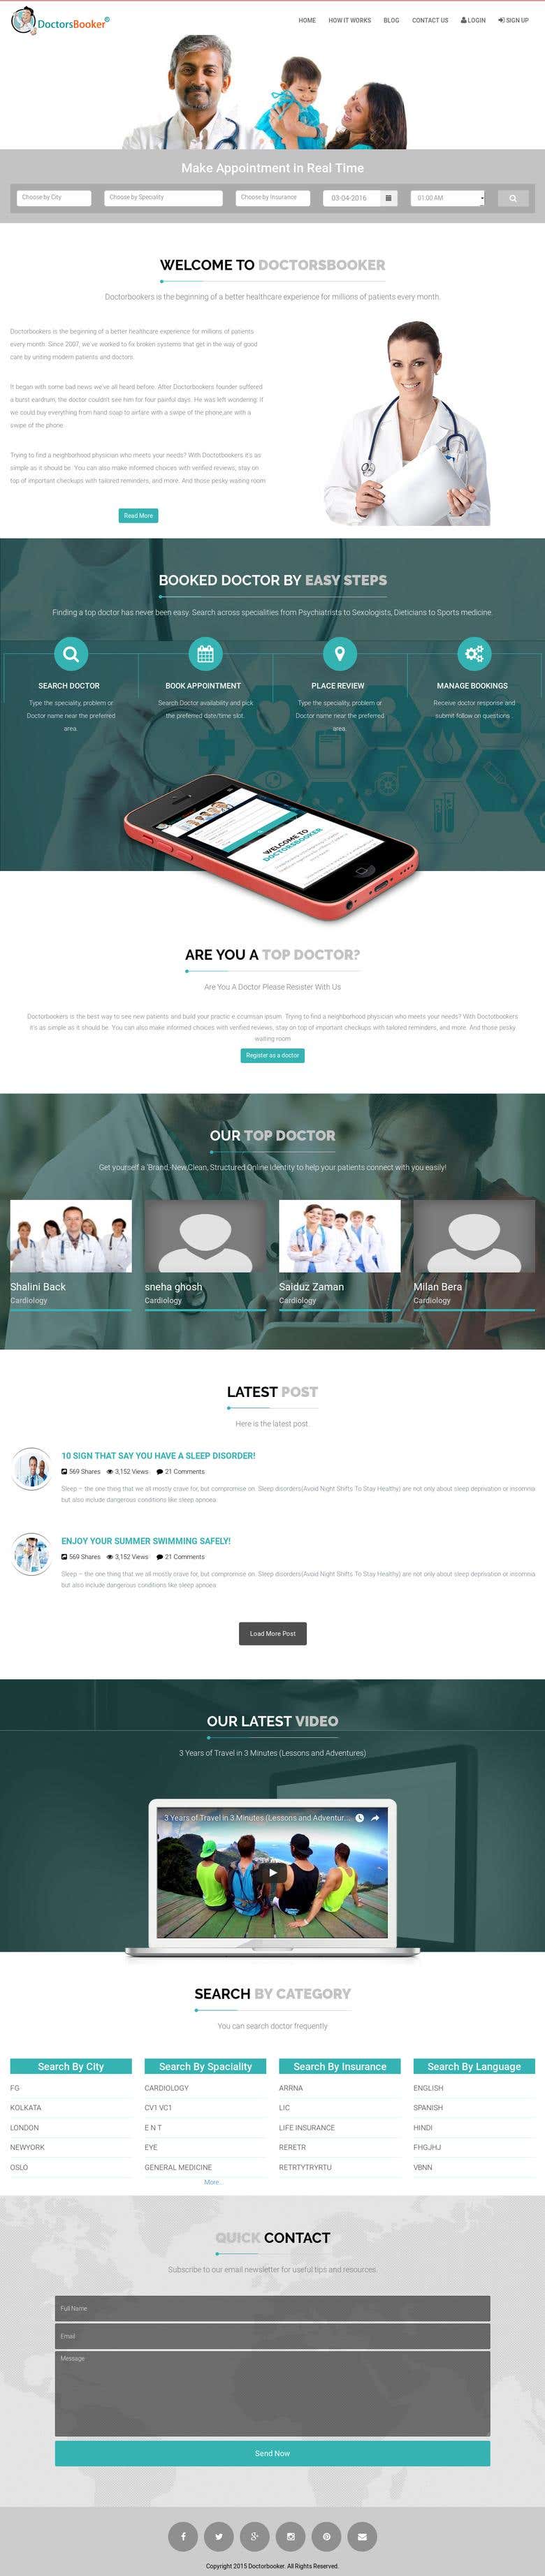 Medical Appointment website